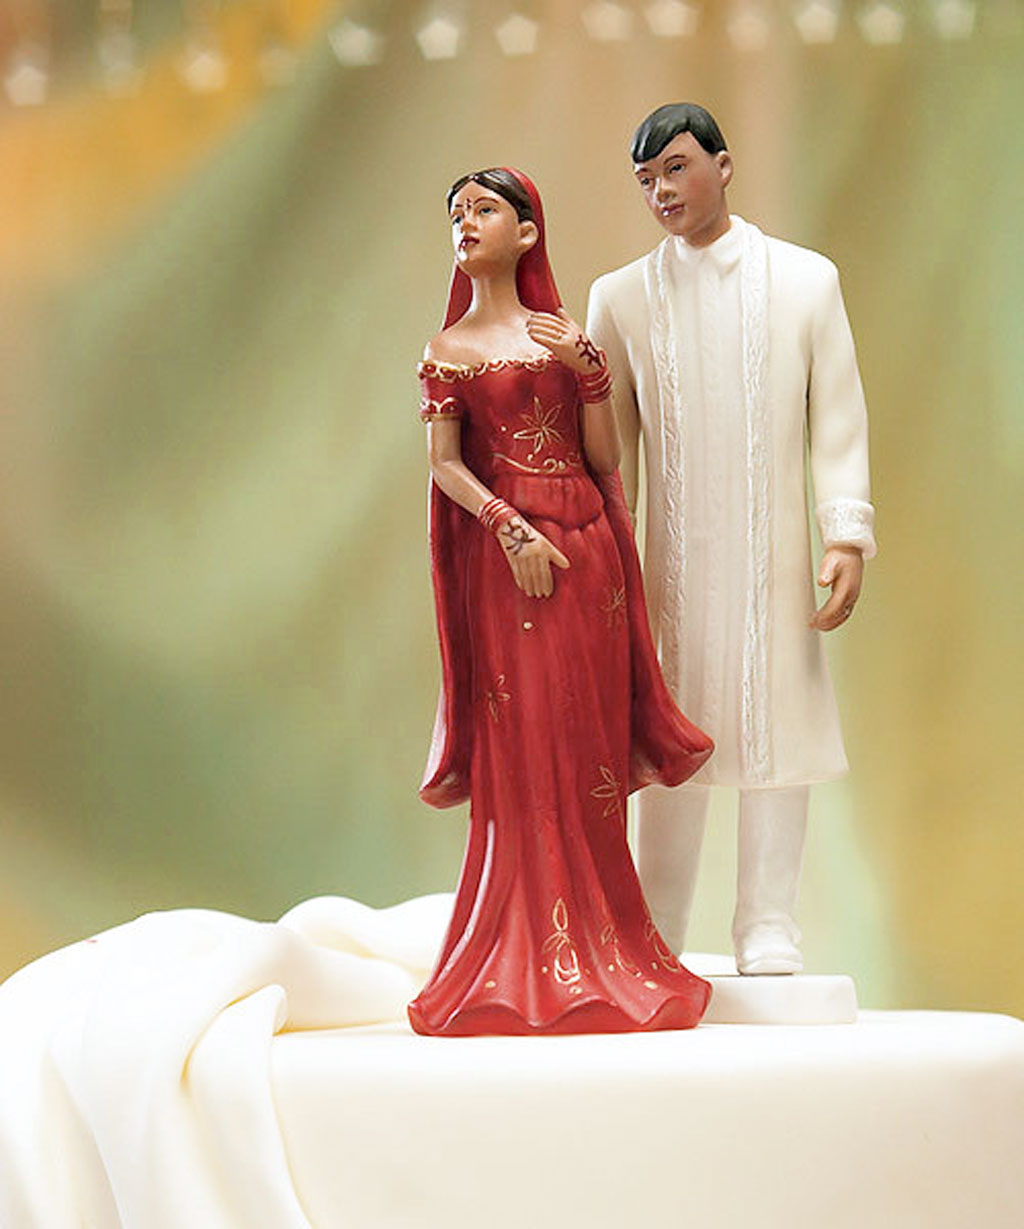 traditional-indian-wedding-star-cake-topper-cake-picture-ideas Top 10 Most Unique and Funny Wedding Cake Toppers 2019